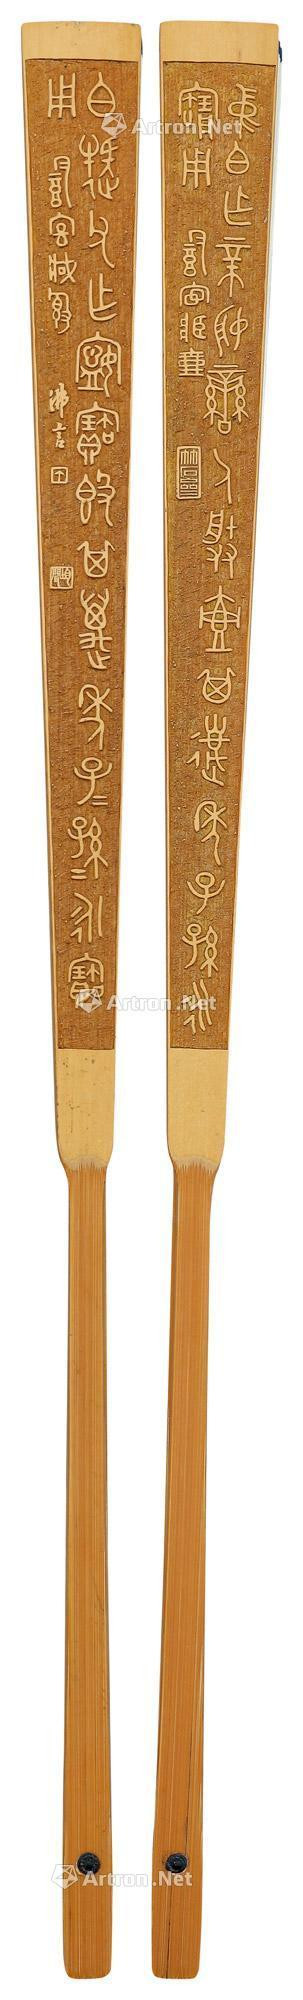 A BAMBOO FAN RIB CARVED WITH DING FOYAN’S CALLIGRAPHY OF BRONZE INSCRIPTION BY SHEN TONG